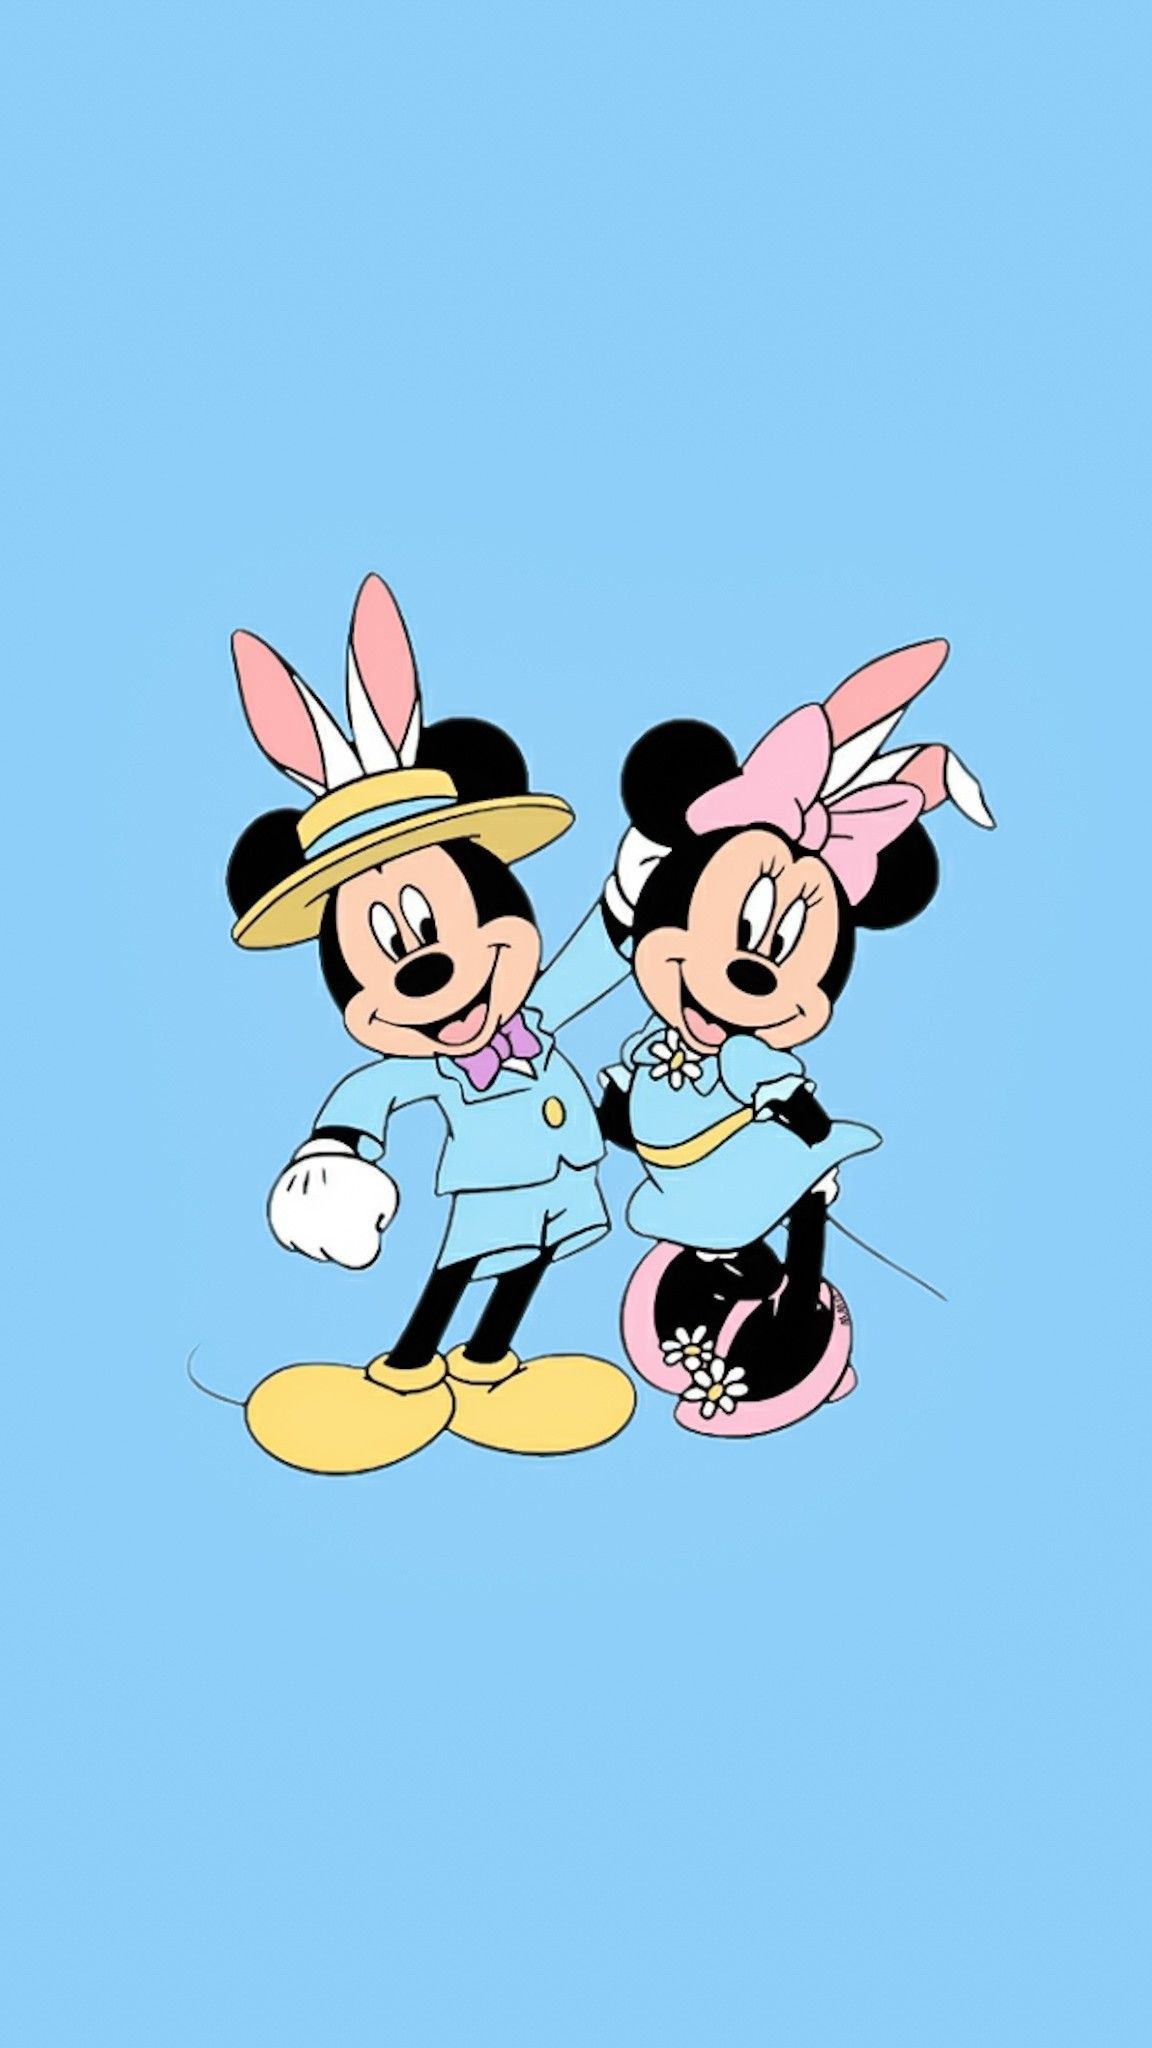 Mickey & Minnie Mouse BG. Mickey mouse wallpaper, Disney characters wallpaper, Cartoon wallpaper iphone